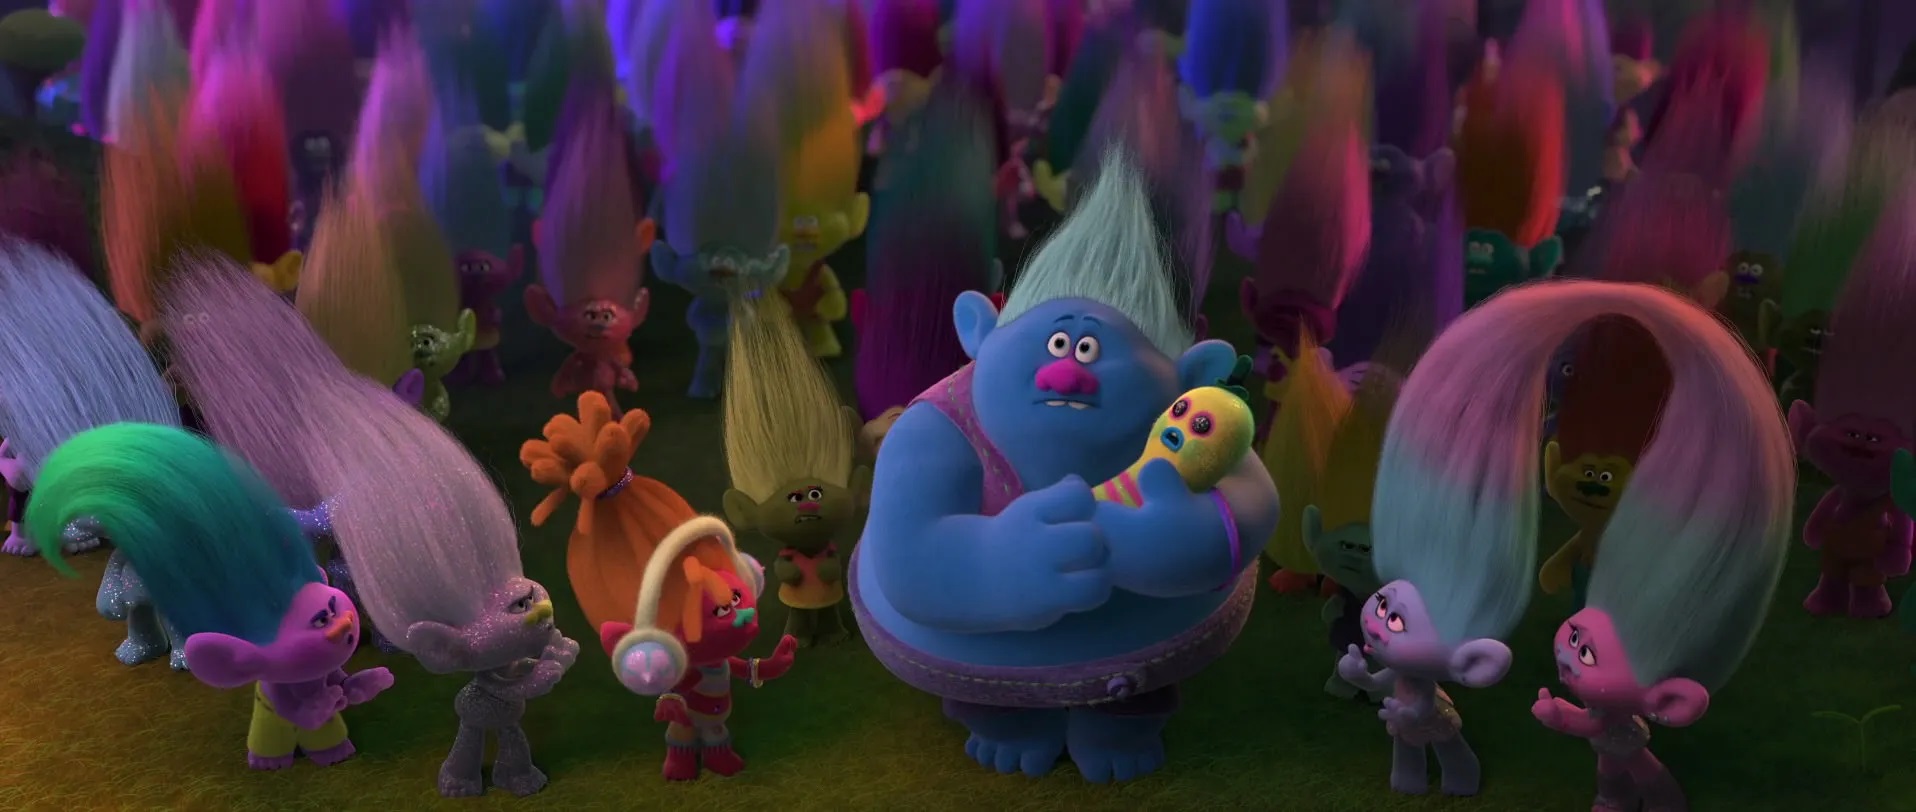 Image - Biggie and the other trolls2.jpg | Dreamworks Animation Wiki ...